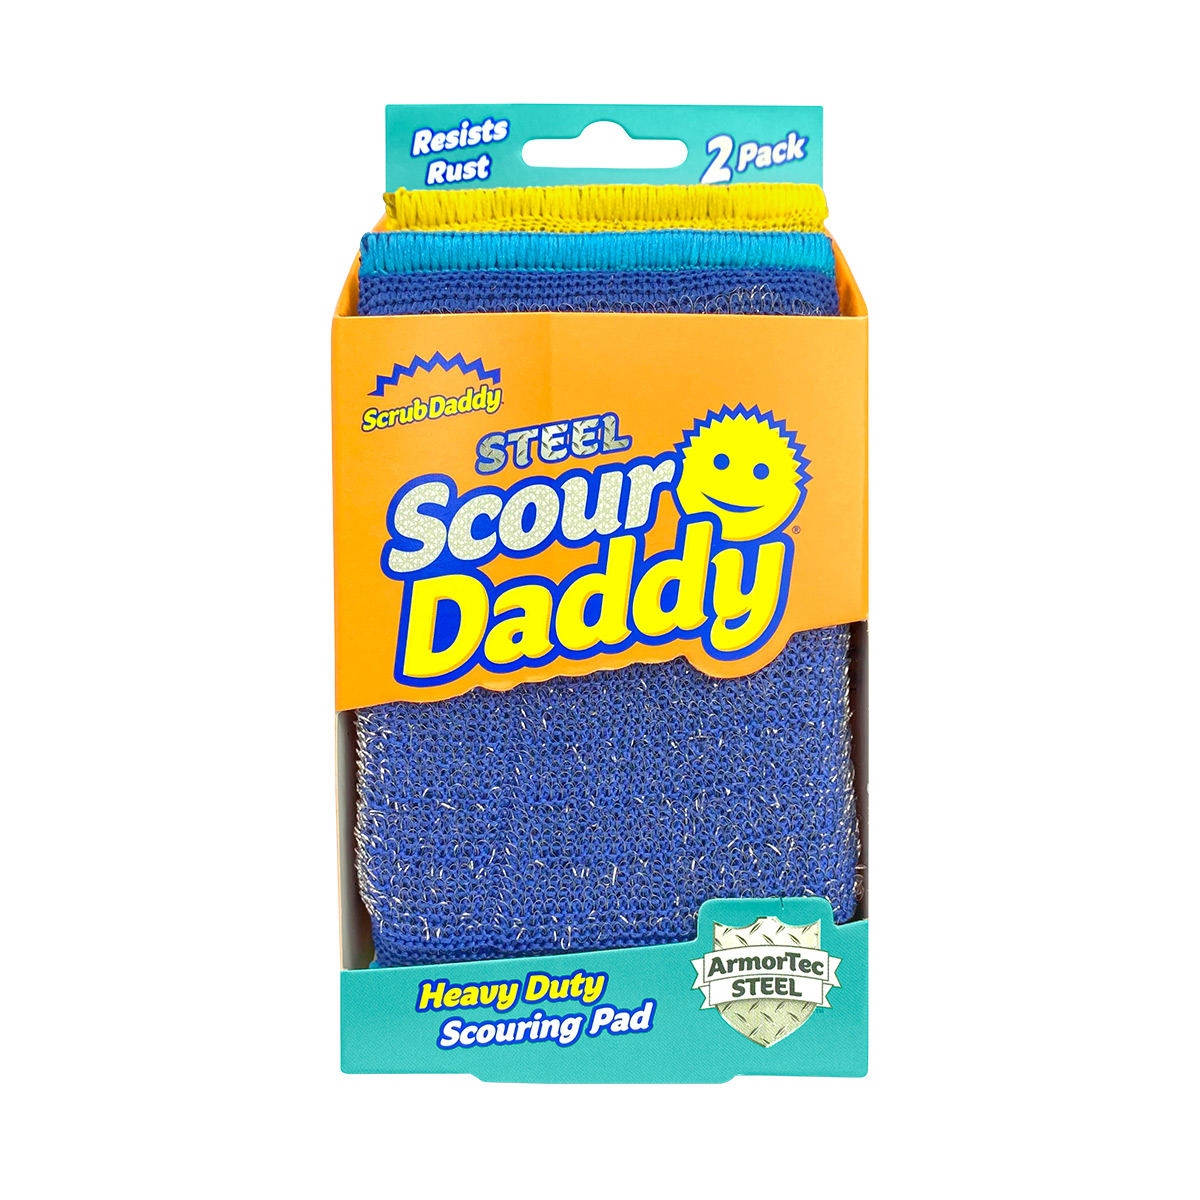 https://www.containerstore.com/catalogimages/449938/10089832-ScourDaddySteel_Packaging-V.jpg